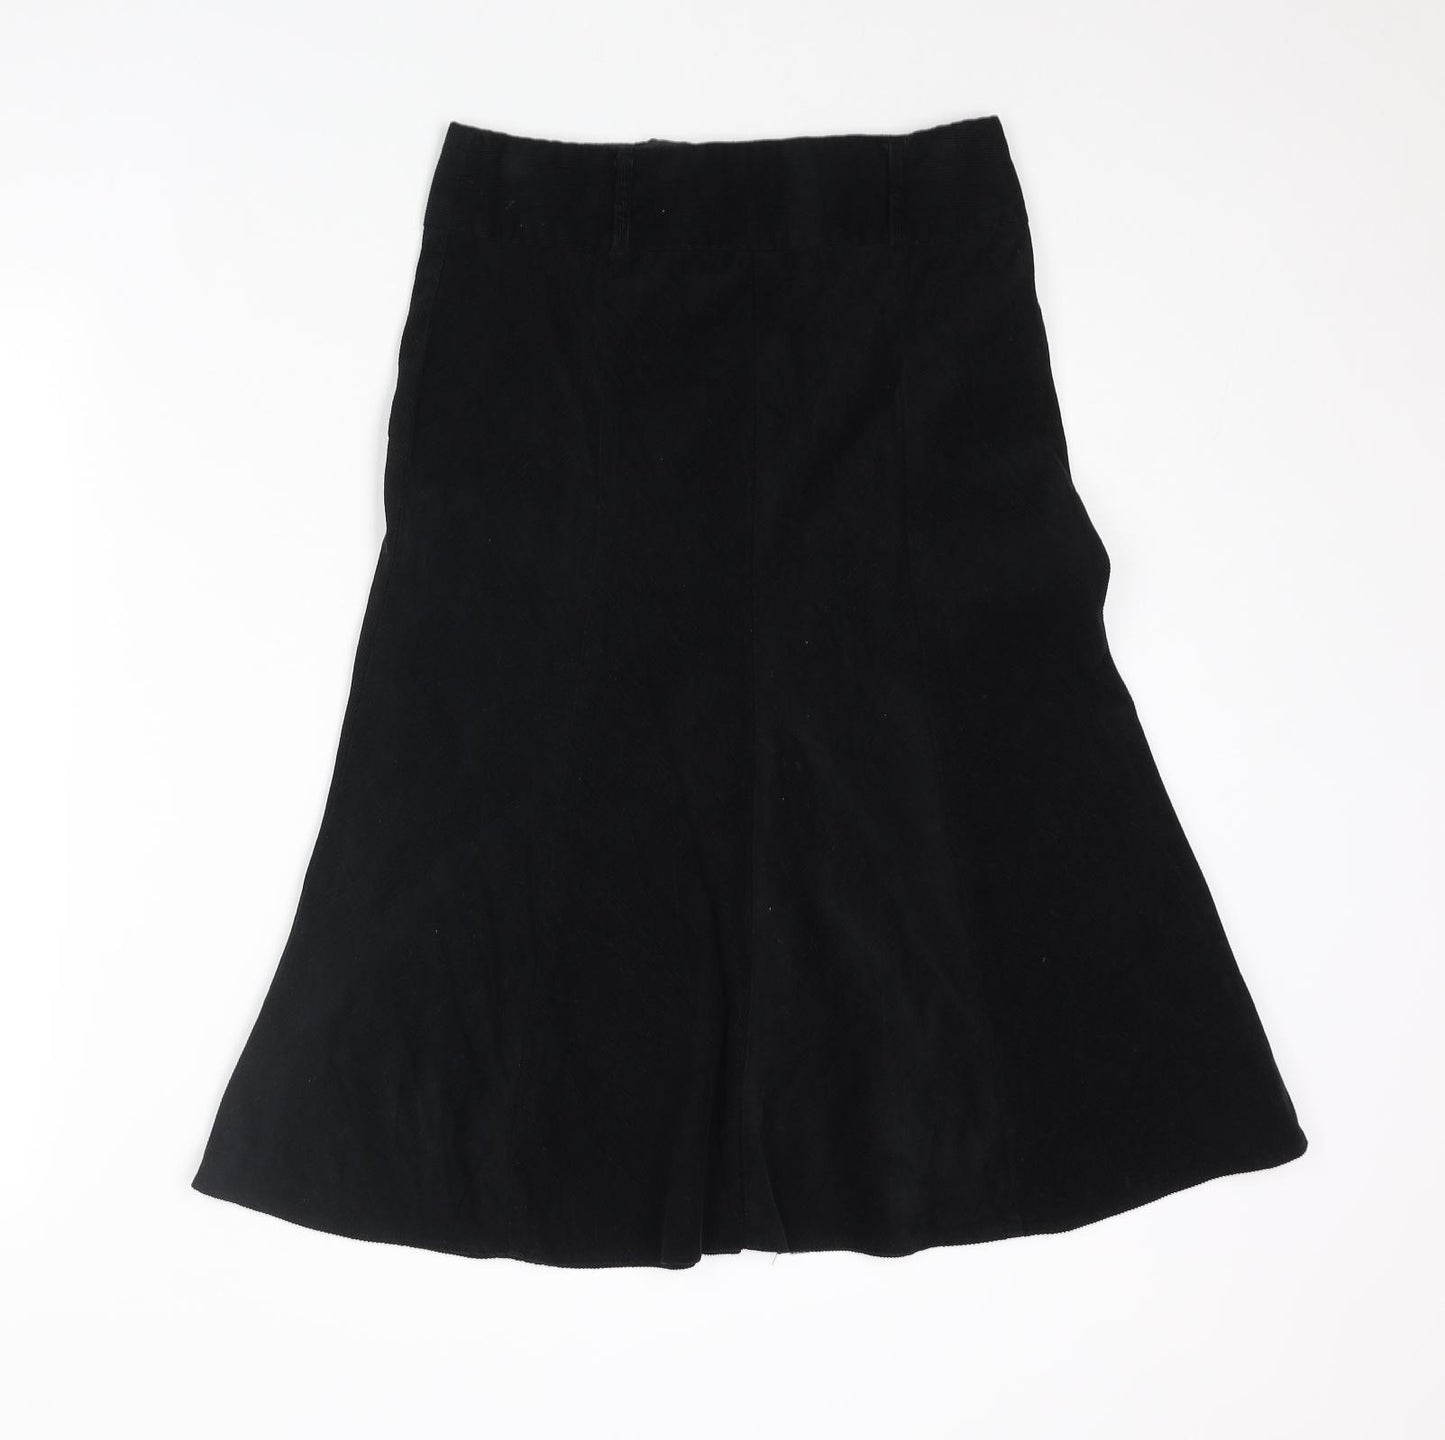 Dorothy Perkins Womens Black Polyester A-Line Skirt Size 6 Zip